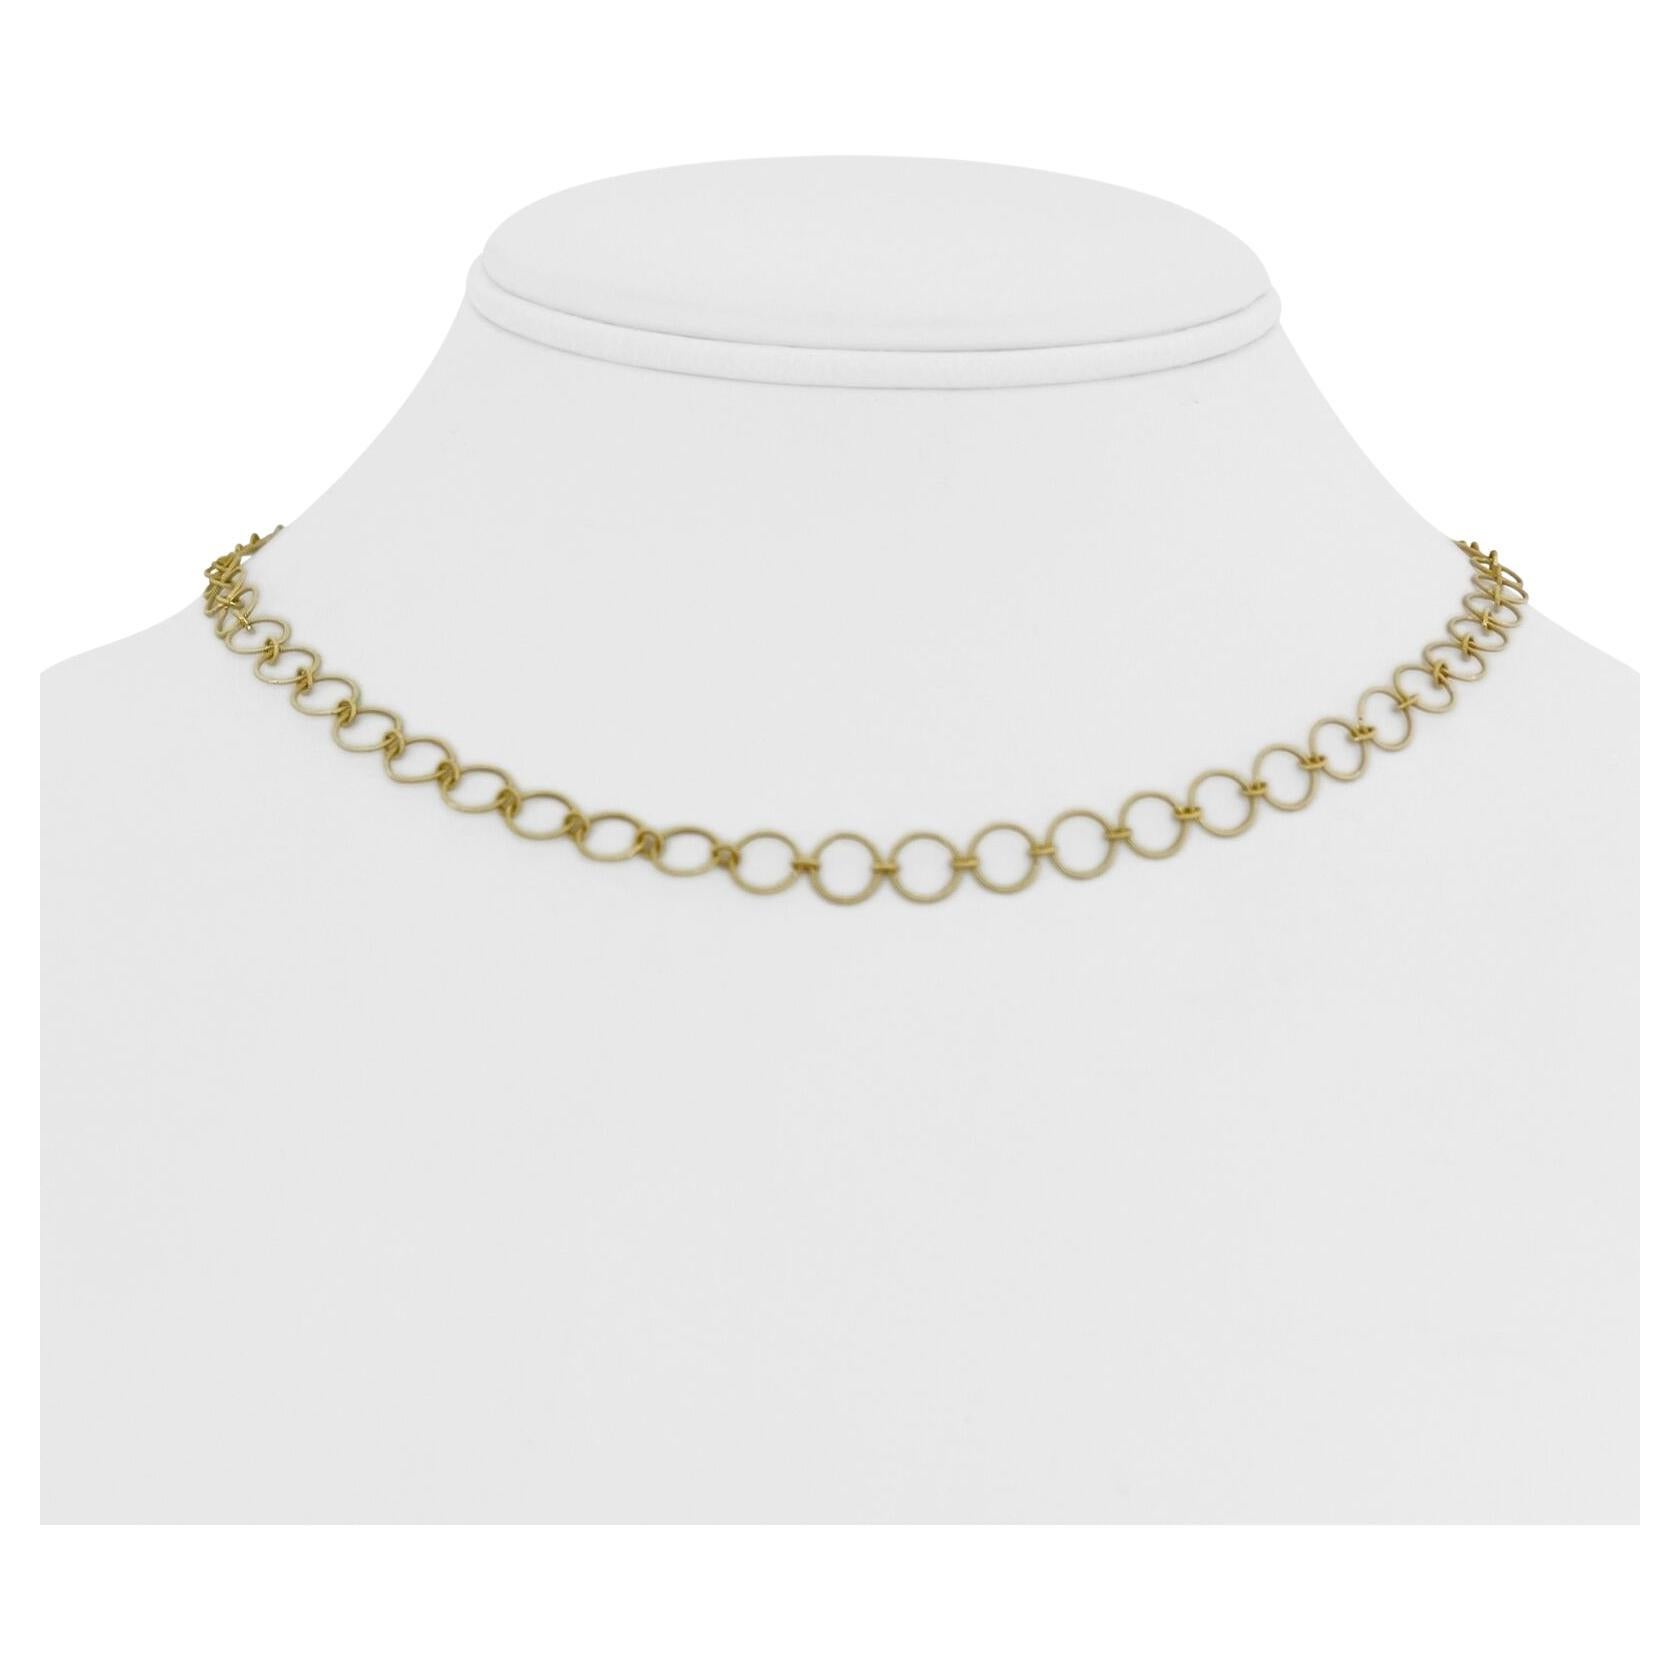 Jude Francis 18 Karat Yellow Gold Light Fancy Circle Link Chain Necklace 